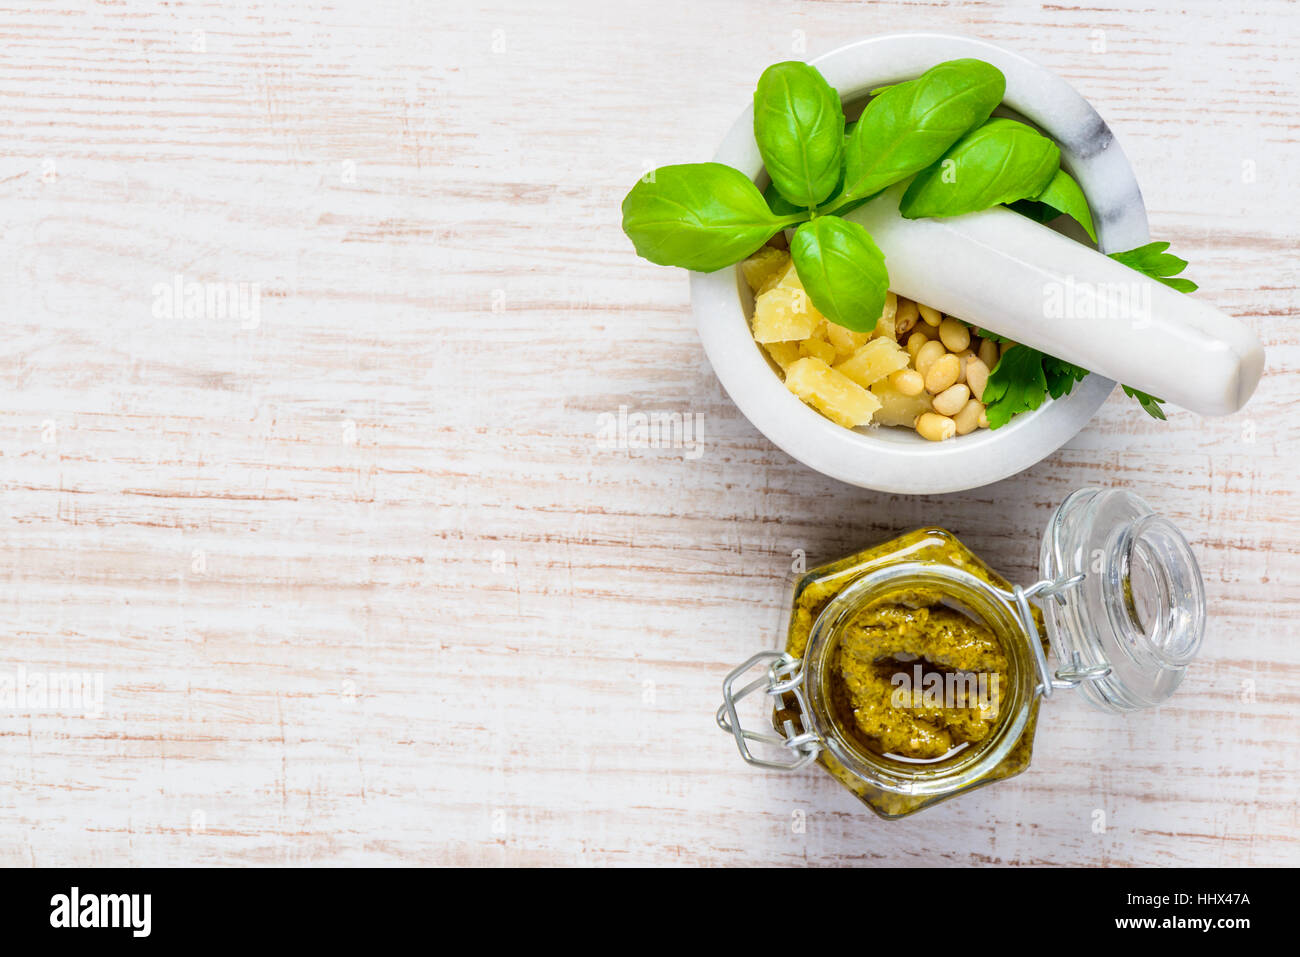 Top View of Copy Space Area with Pesto and Pestle with Mortar and Green Fresh Basil with Parmesan and Pine Nuts Stock Photo